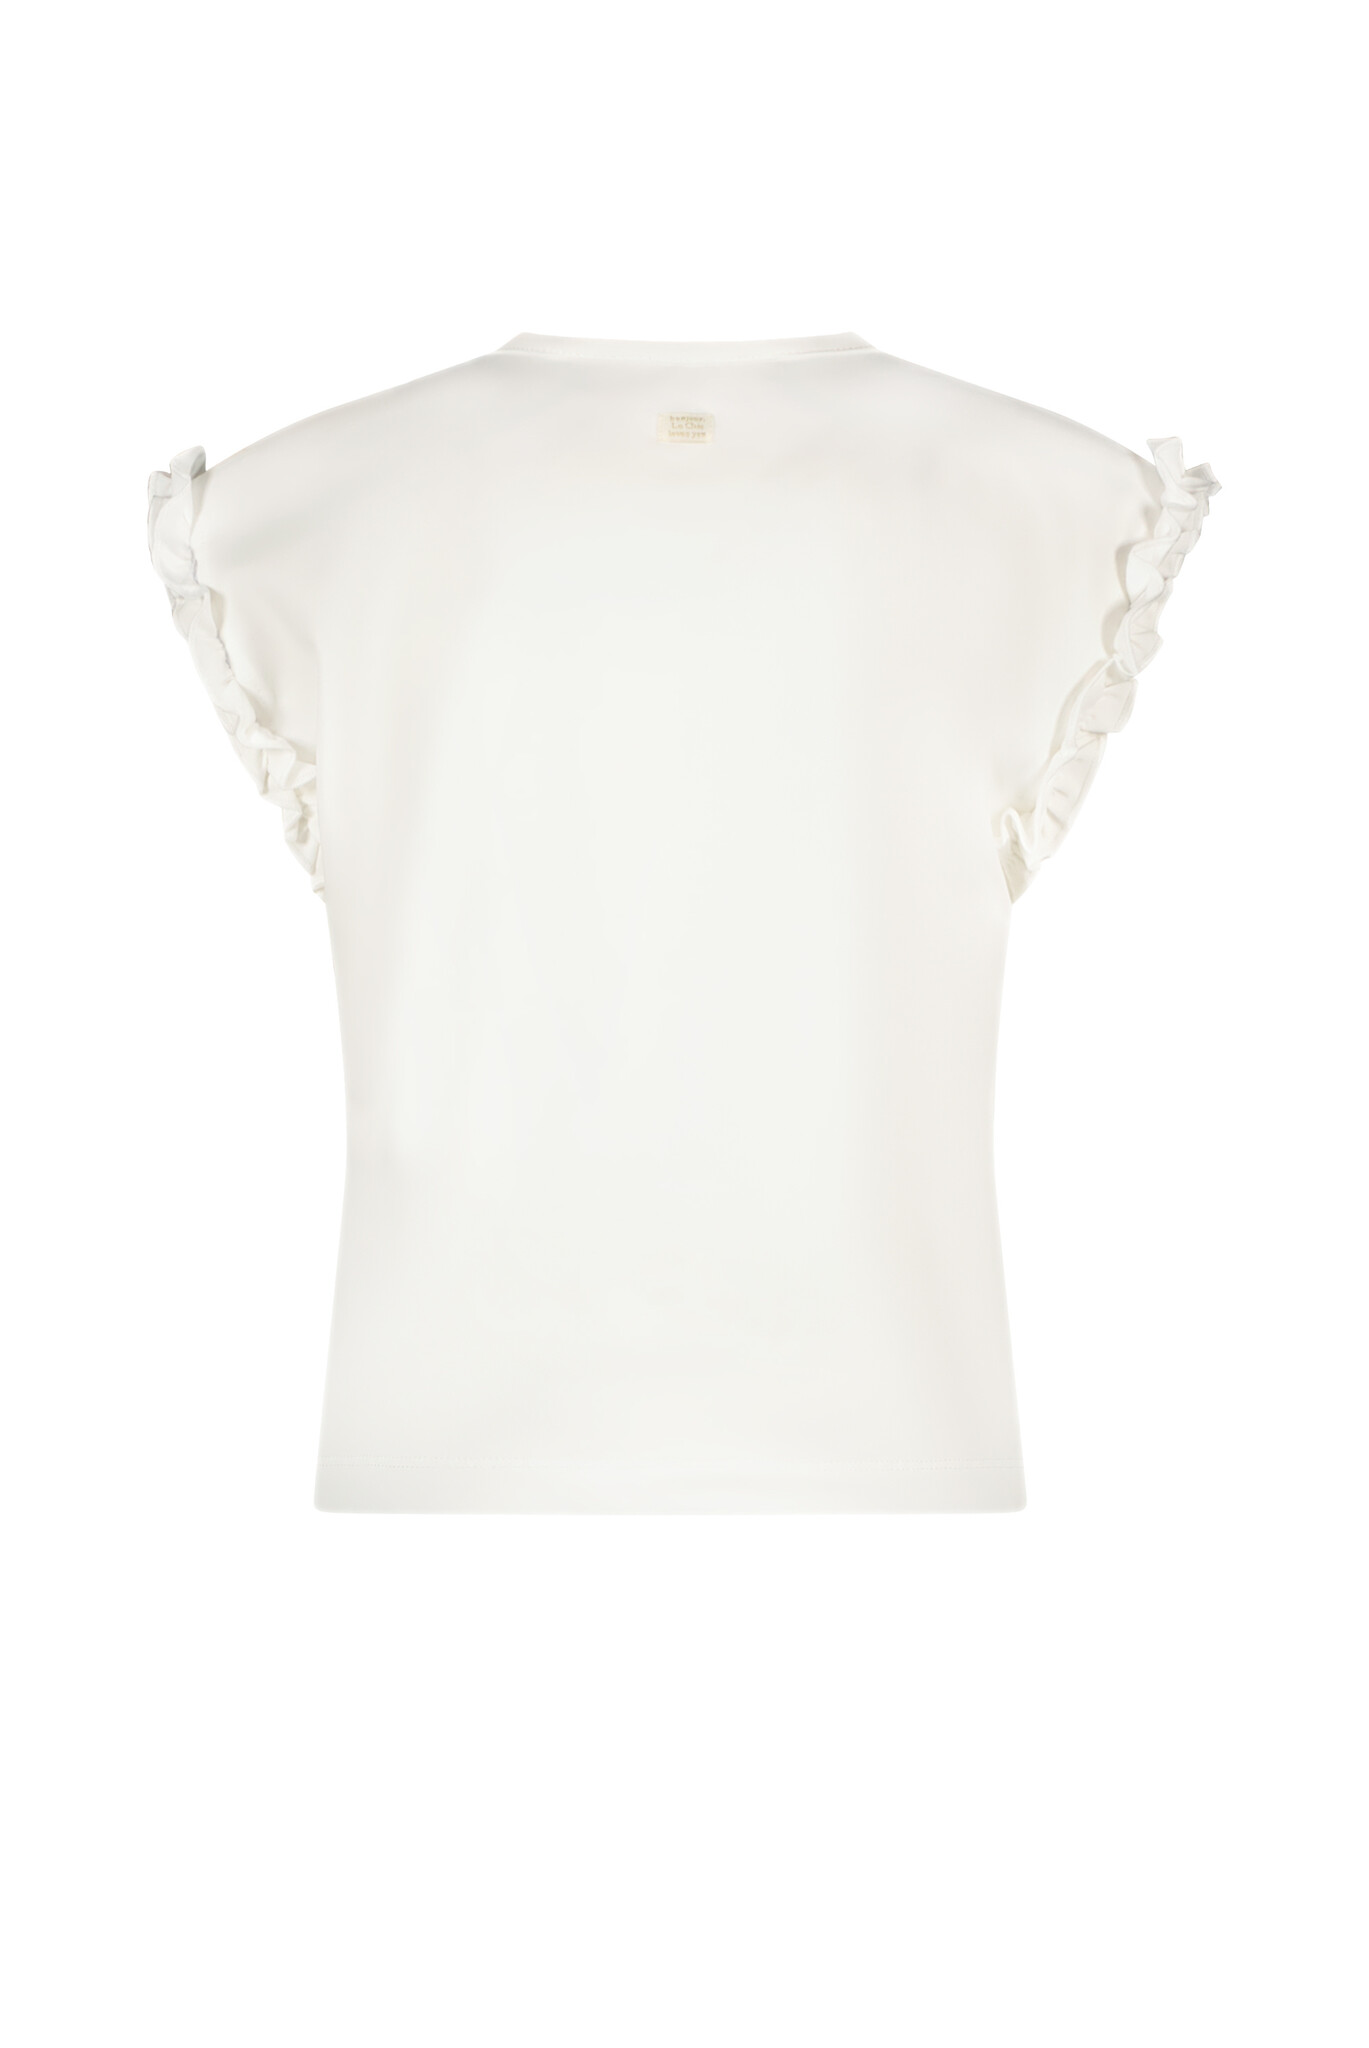 Nopaly Flowers Tee - Off White